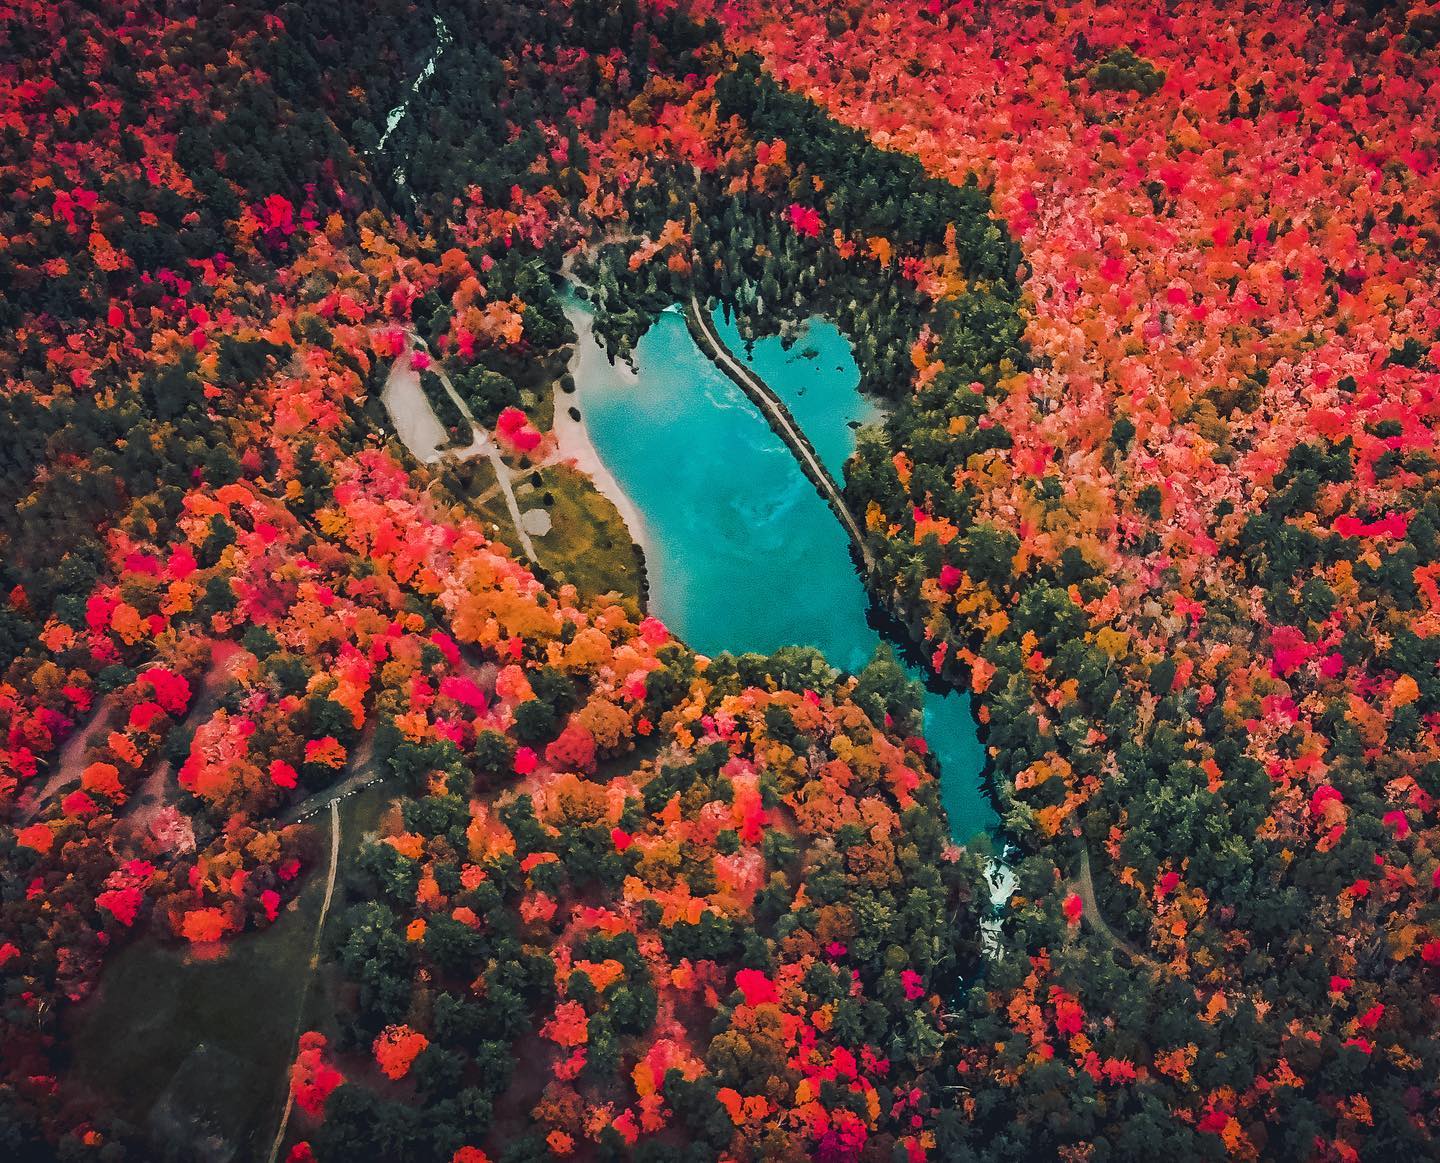 Fall in Northern Ontario, Canada is actually lit.